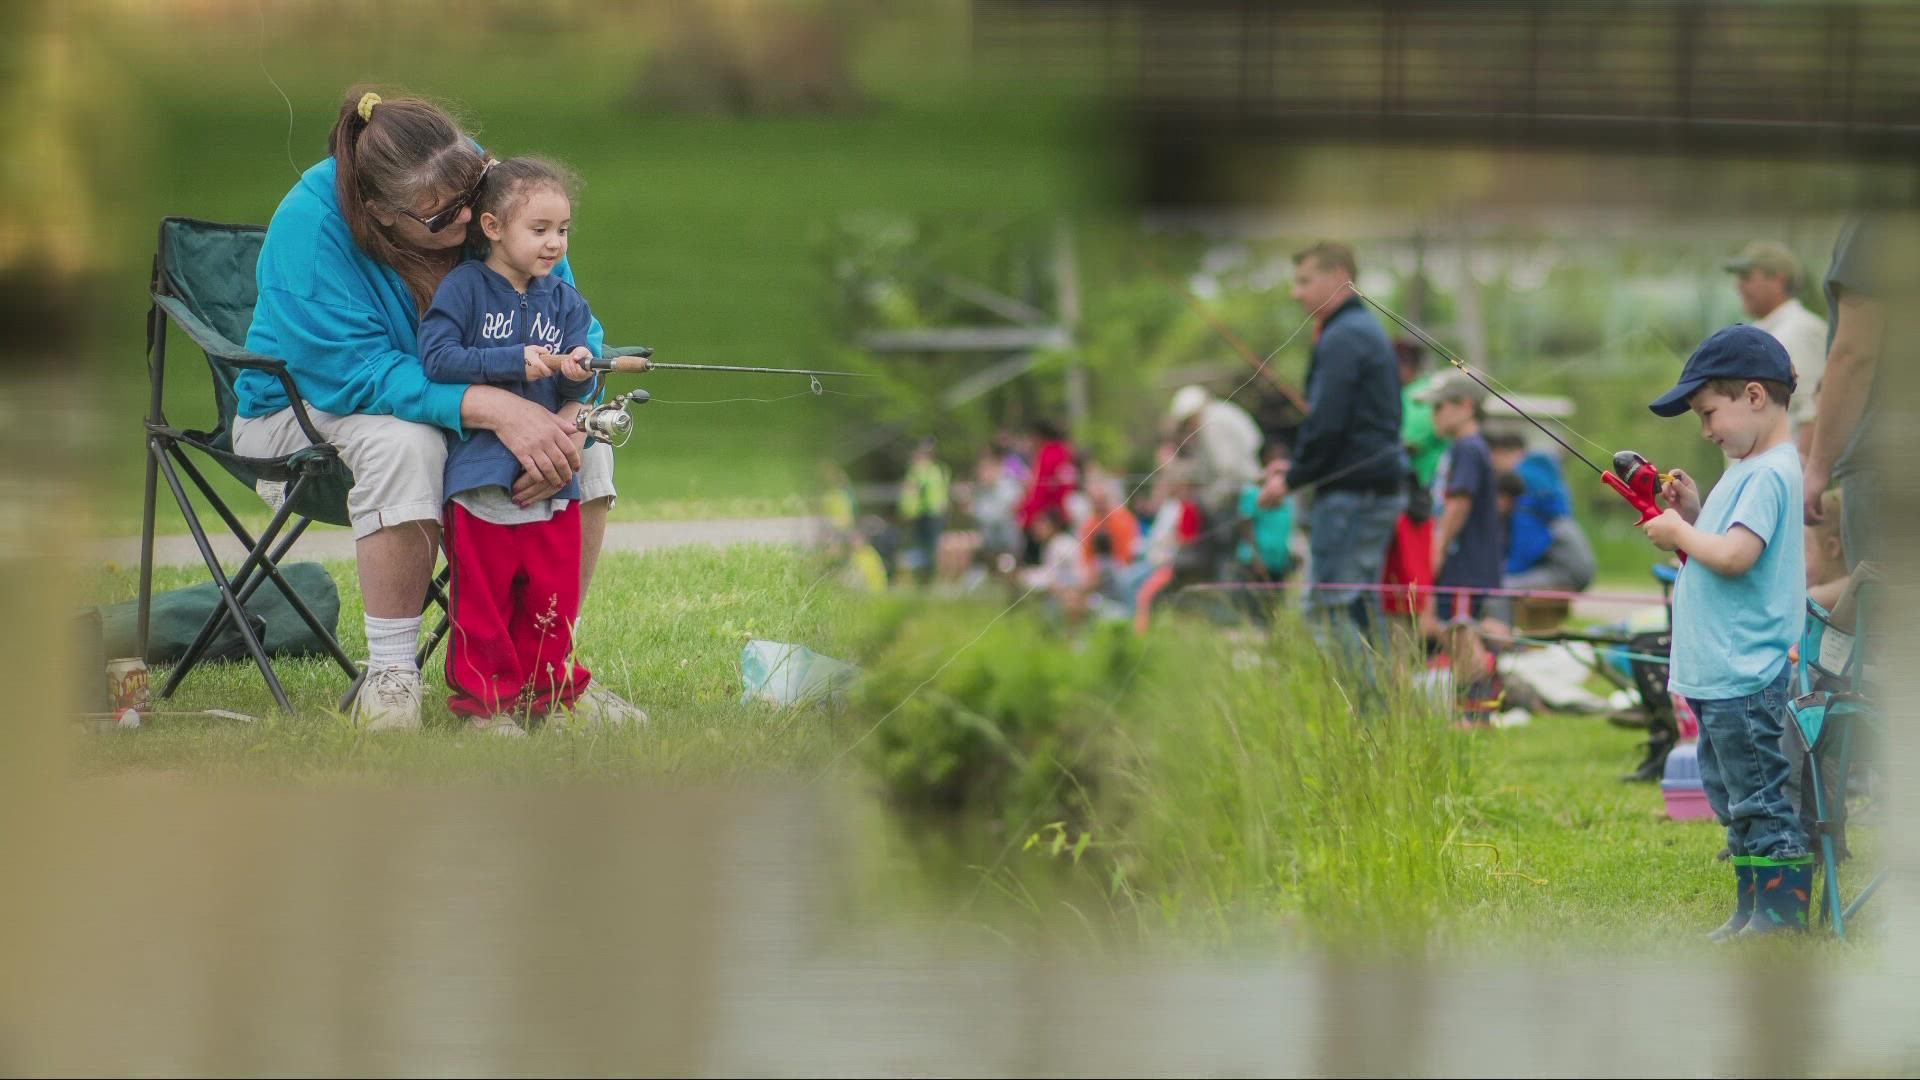 A well-stocked Ohio and Erie Canal awaits anglers of all ages.